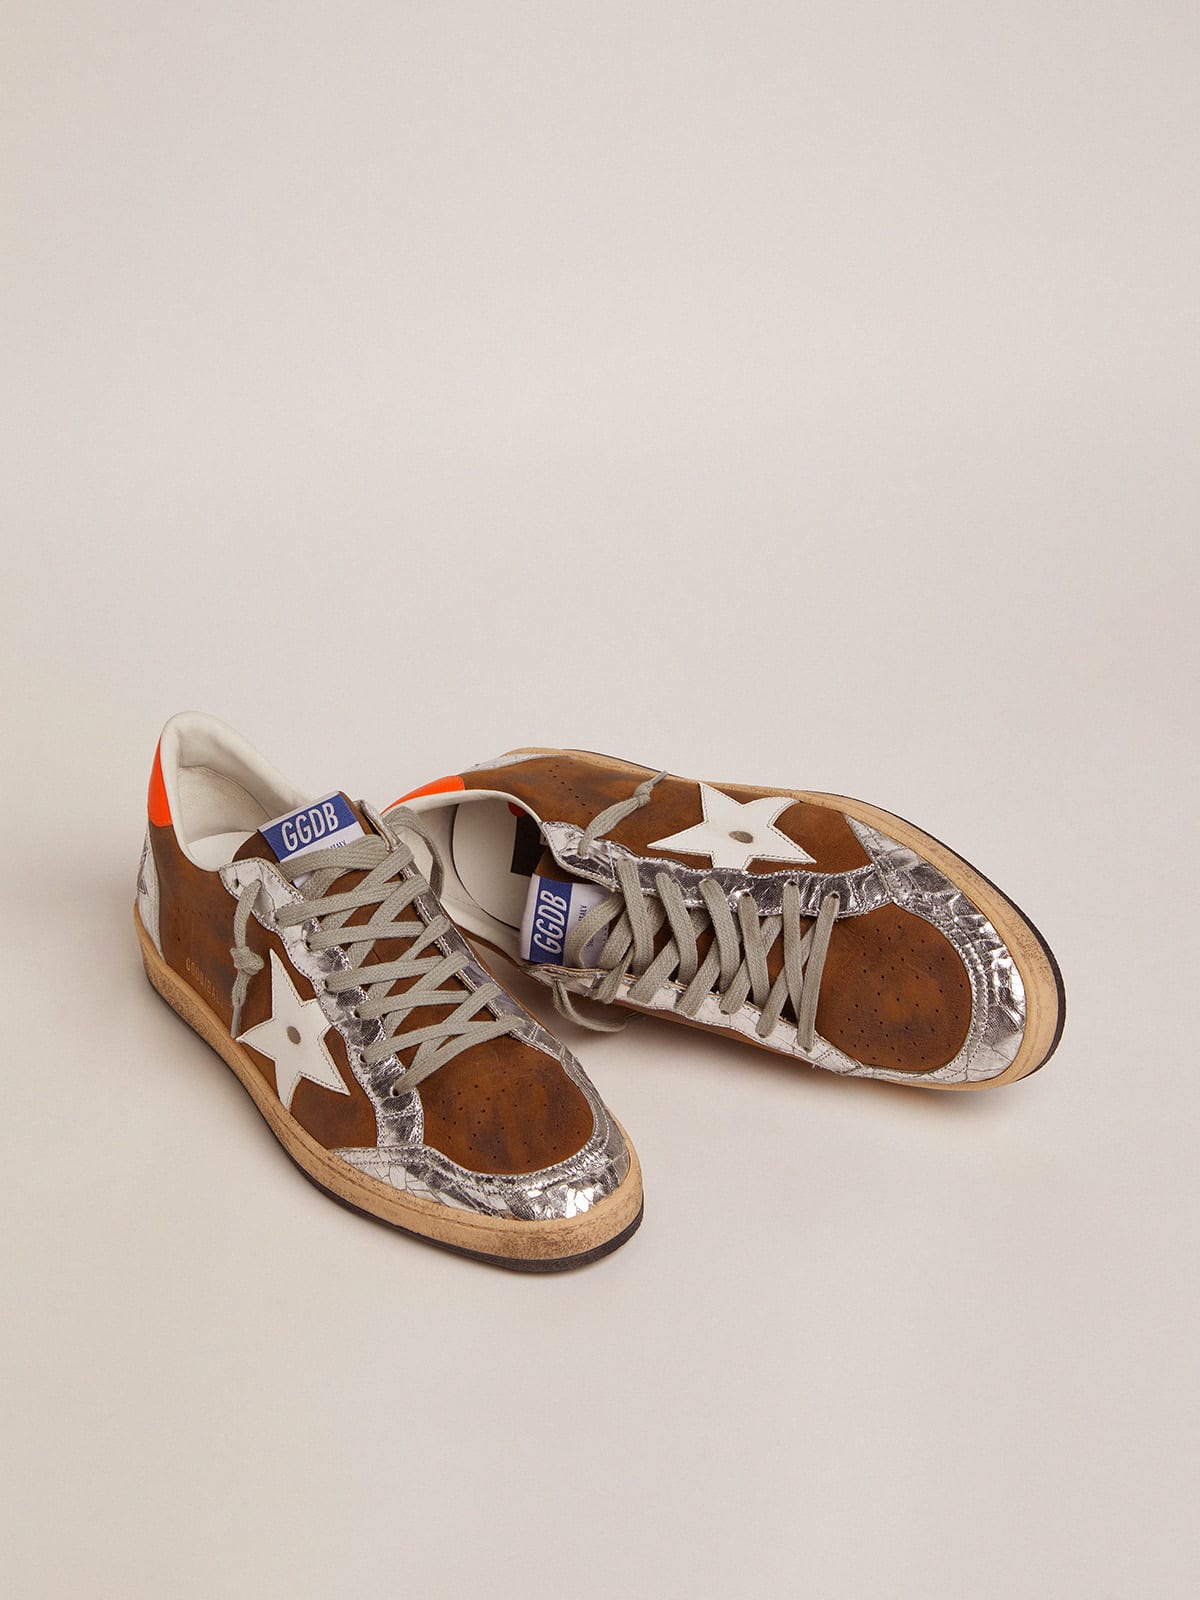 Golden Goose - Ball Star sneakers in brown waxed suede with a white leather star in 